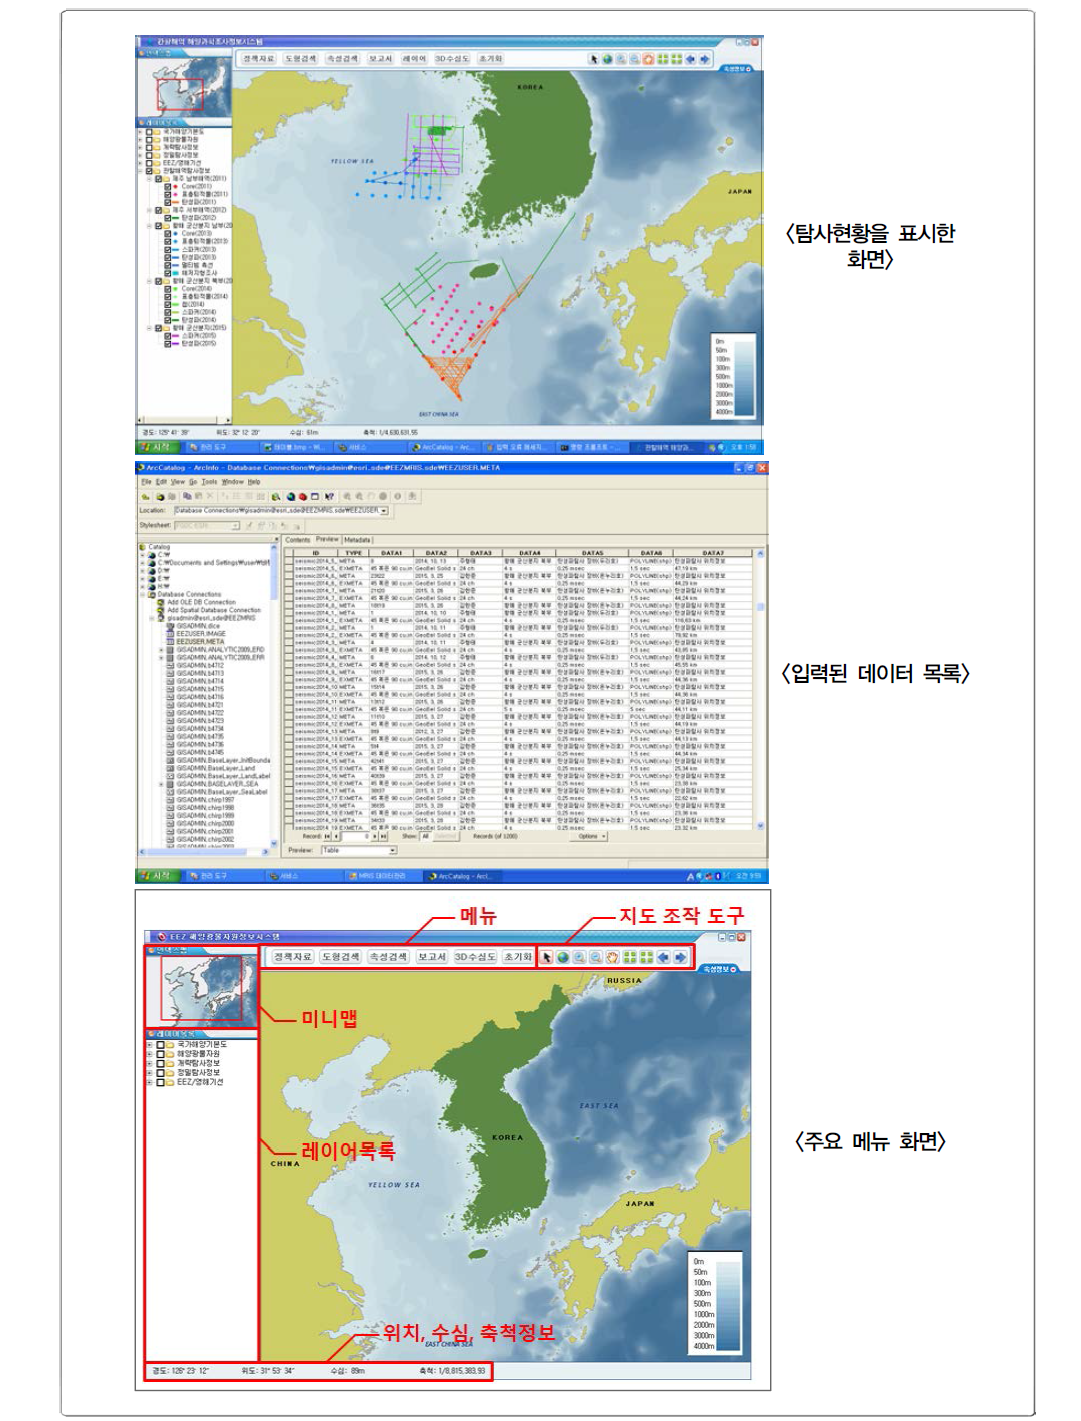 Inquiry into graphic data of marine exploration data and example of data management table.